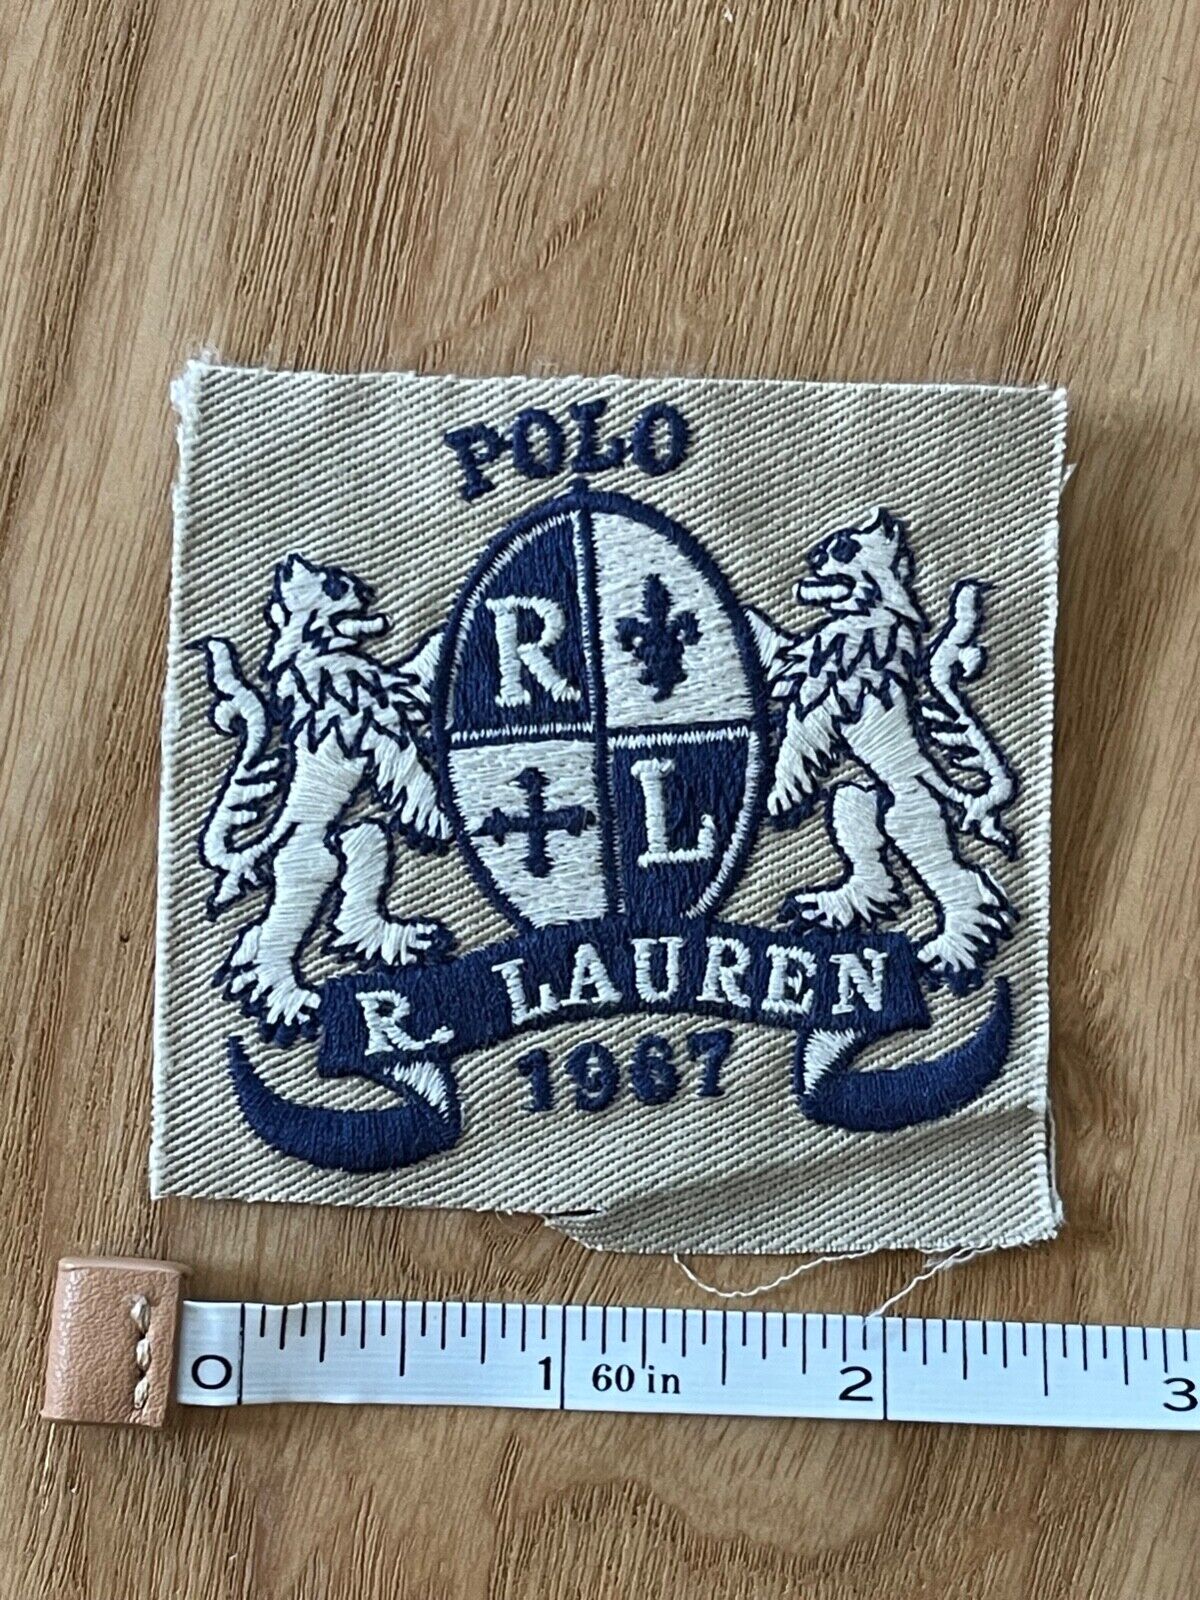 Polo Ralph Lauren embroideries double lion crest classic logo on twill